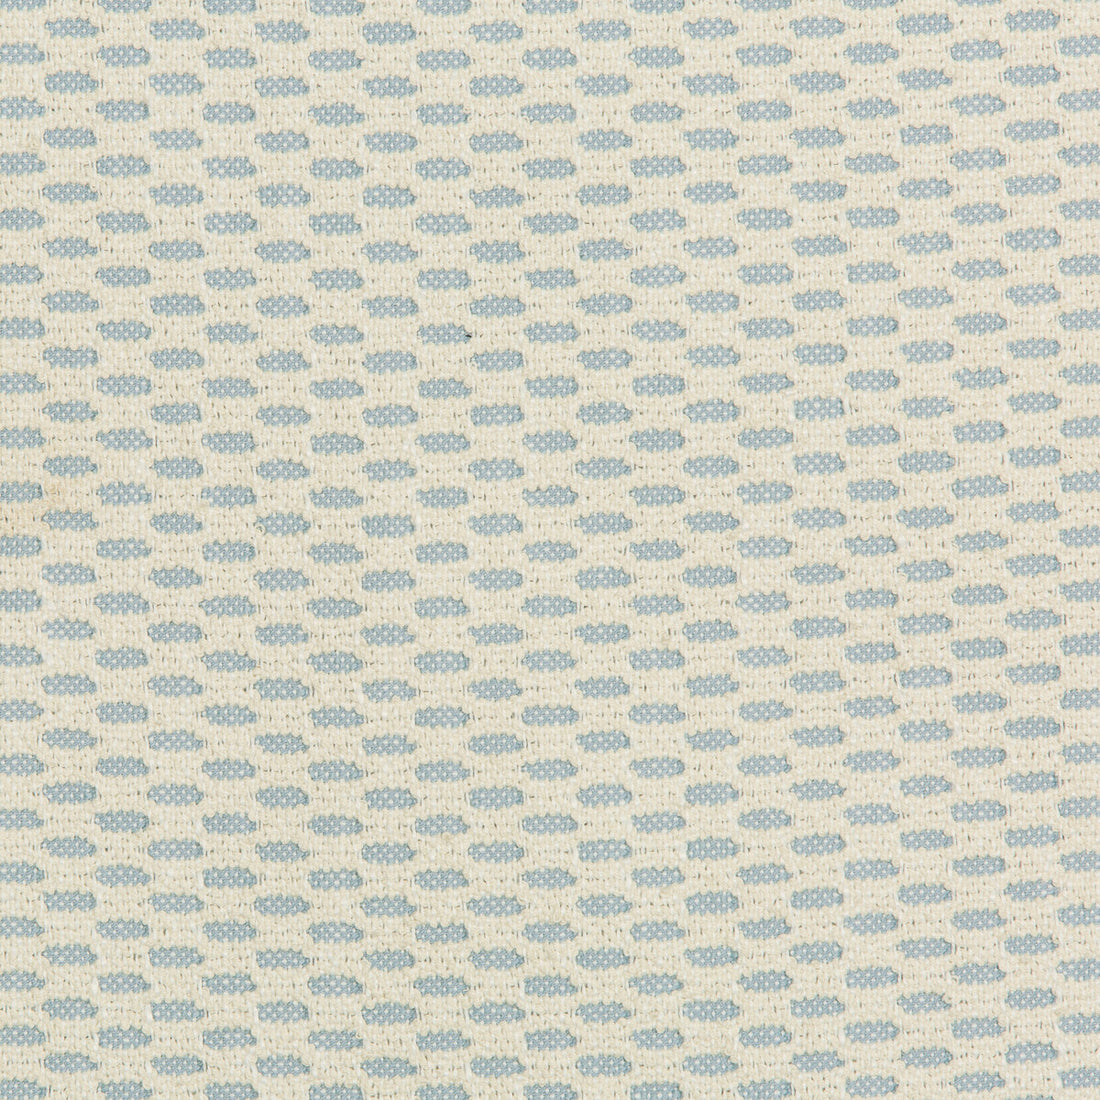 Kravet Design fabric in 36078-51 color - pattern 36078.51.0 - by Kravet Design in the Inside Out Performance Fabrics collection